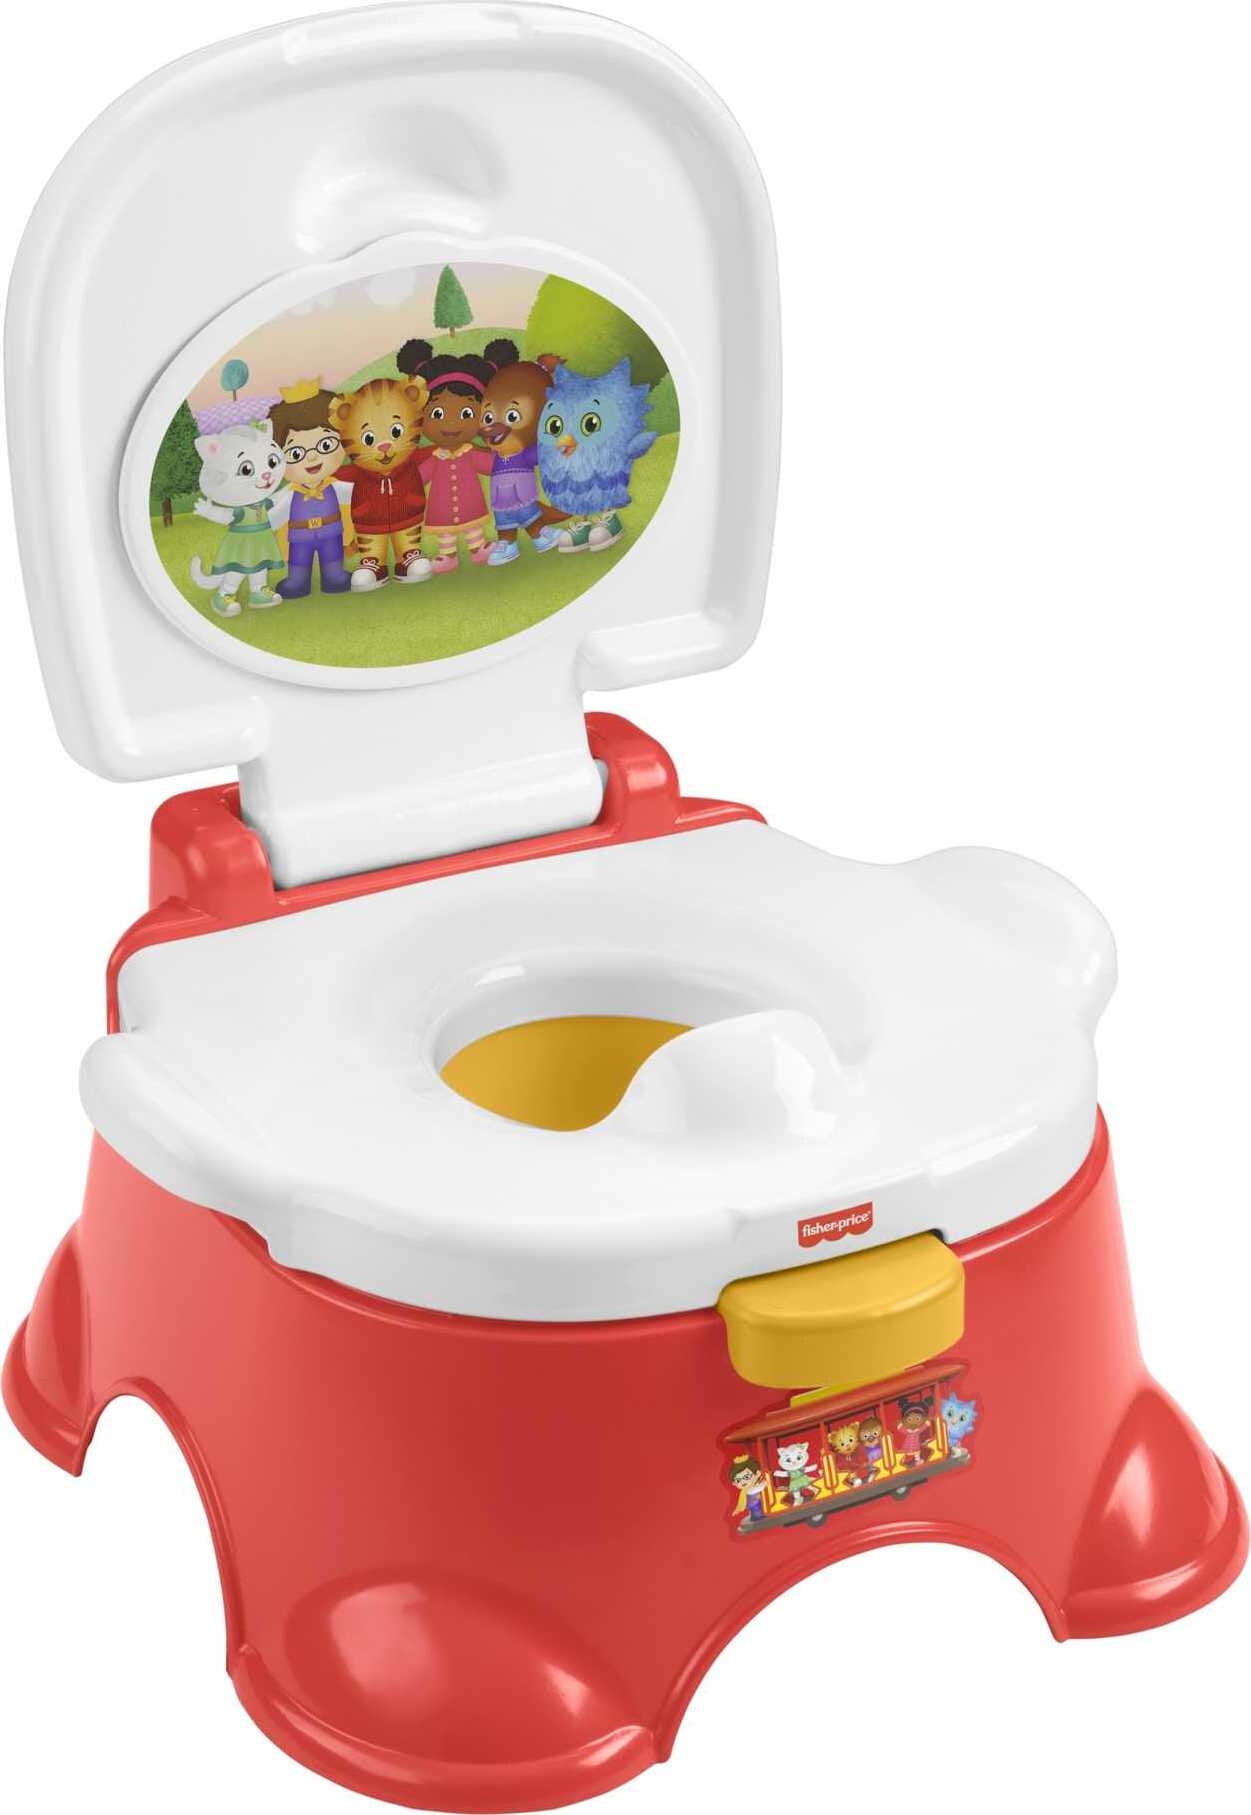 Fisher-Price 2-in-1 Travel Potty Portable Infant to Toddler Potty Training Toilet and Removable Potty Ring for Travel 